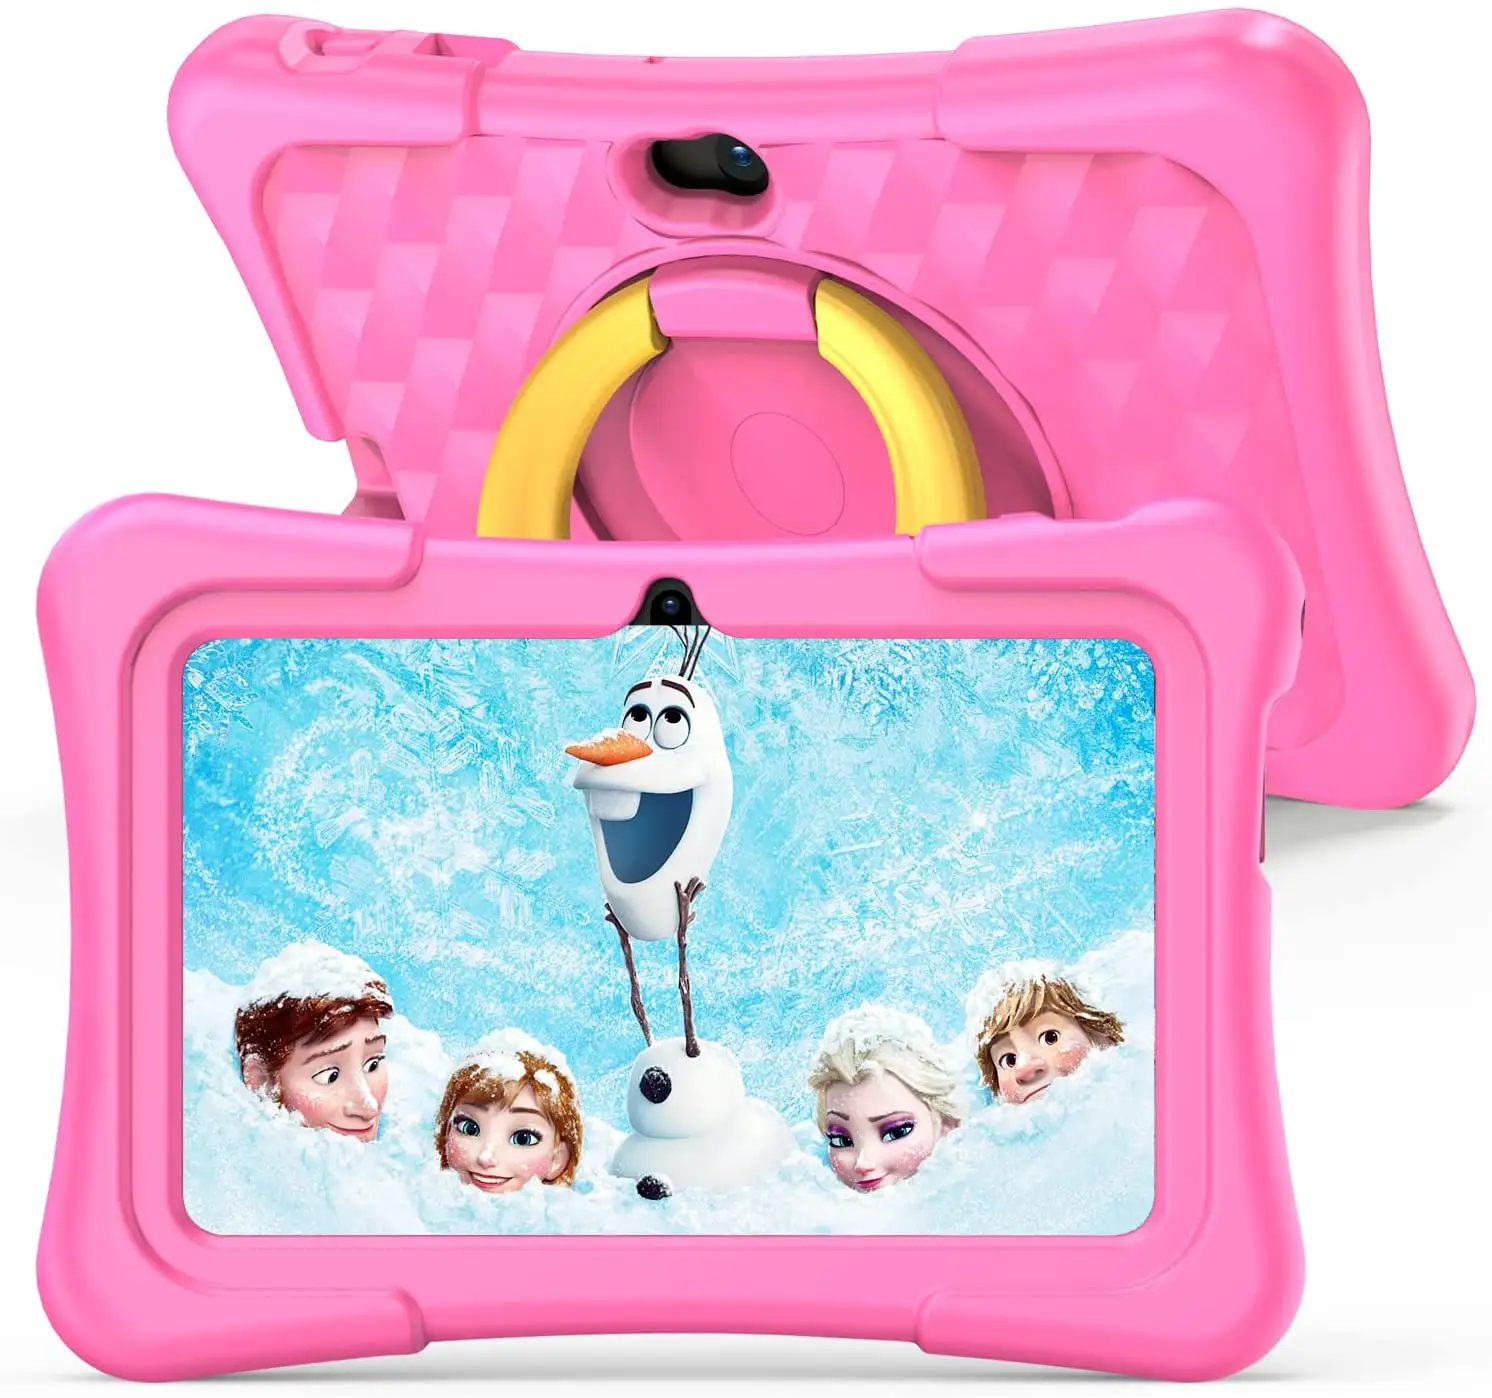 Christmas Gifts 7inch Tablet Children Tablet PC 8GB Android Colorful Kids Tablet for Many Kids online education